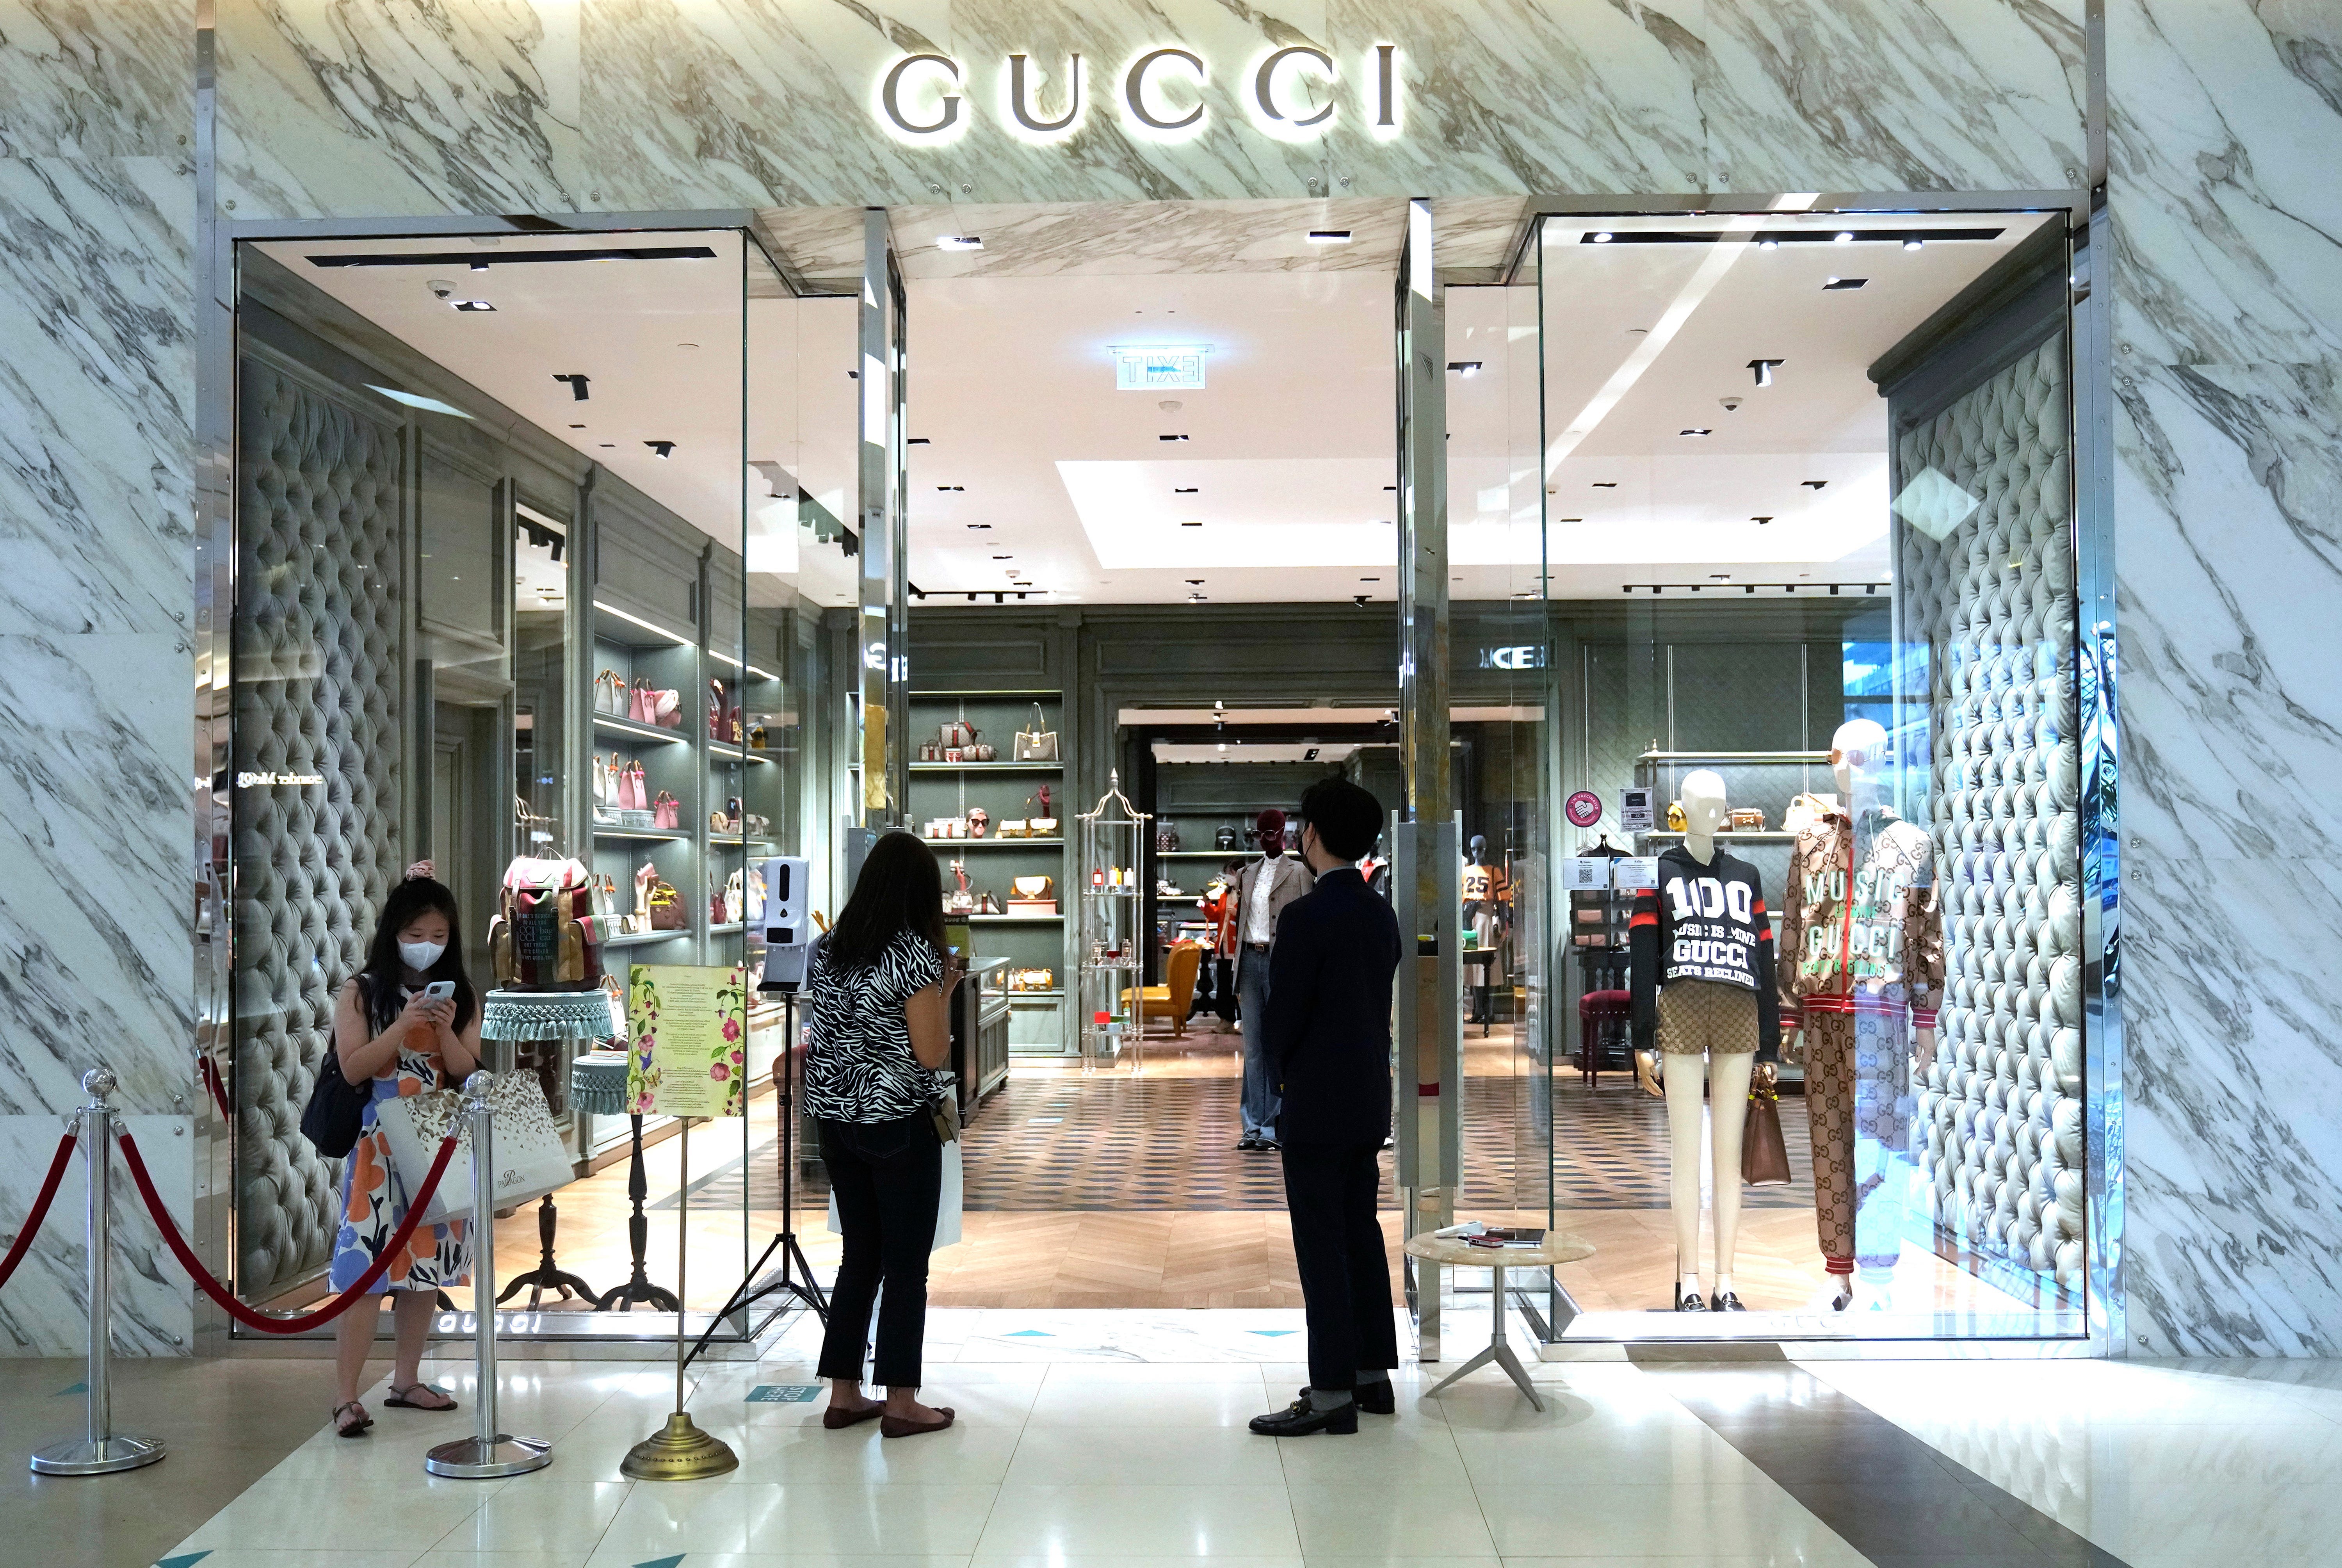 Gucci could open store in Detroit